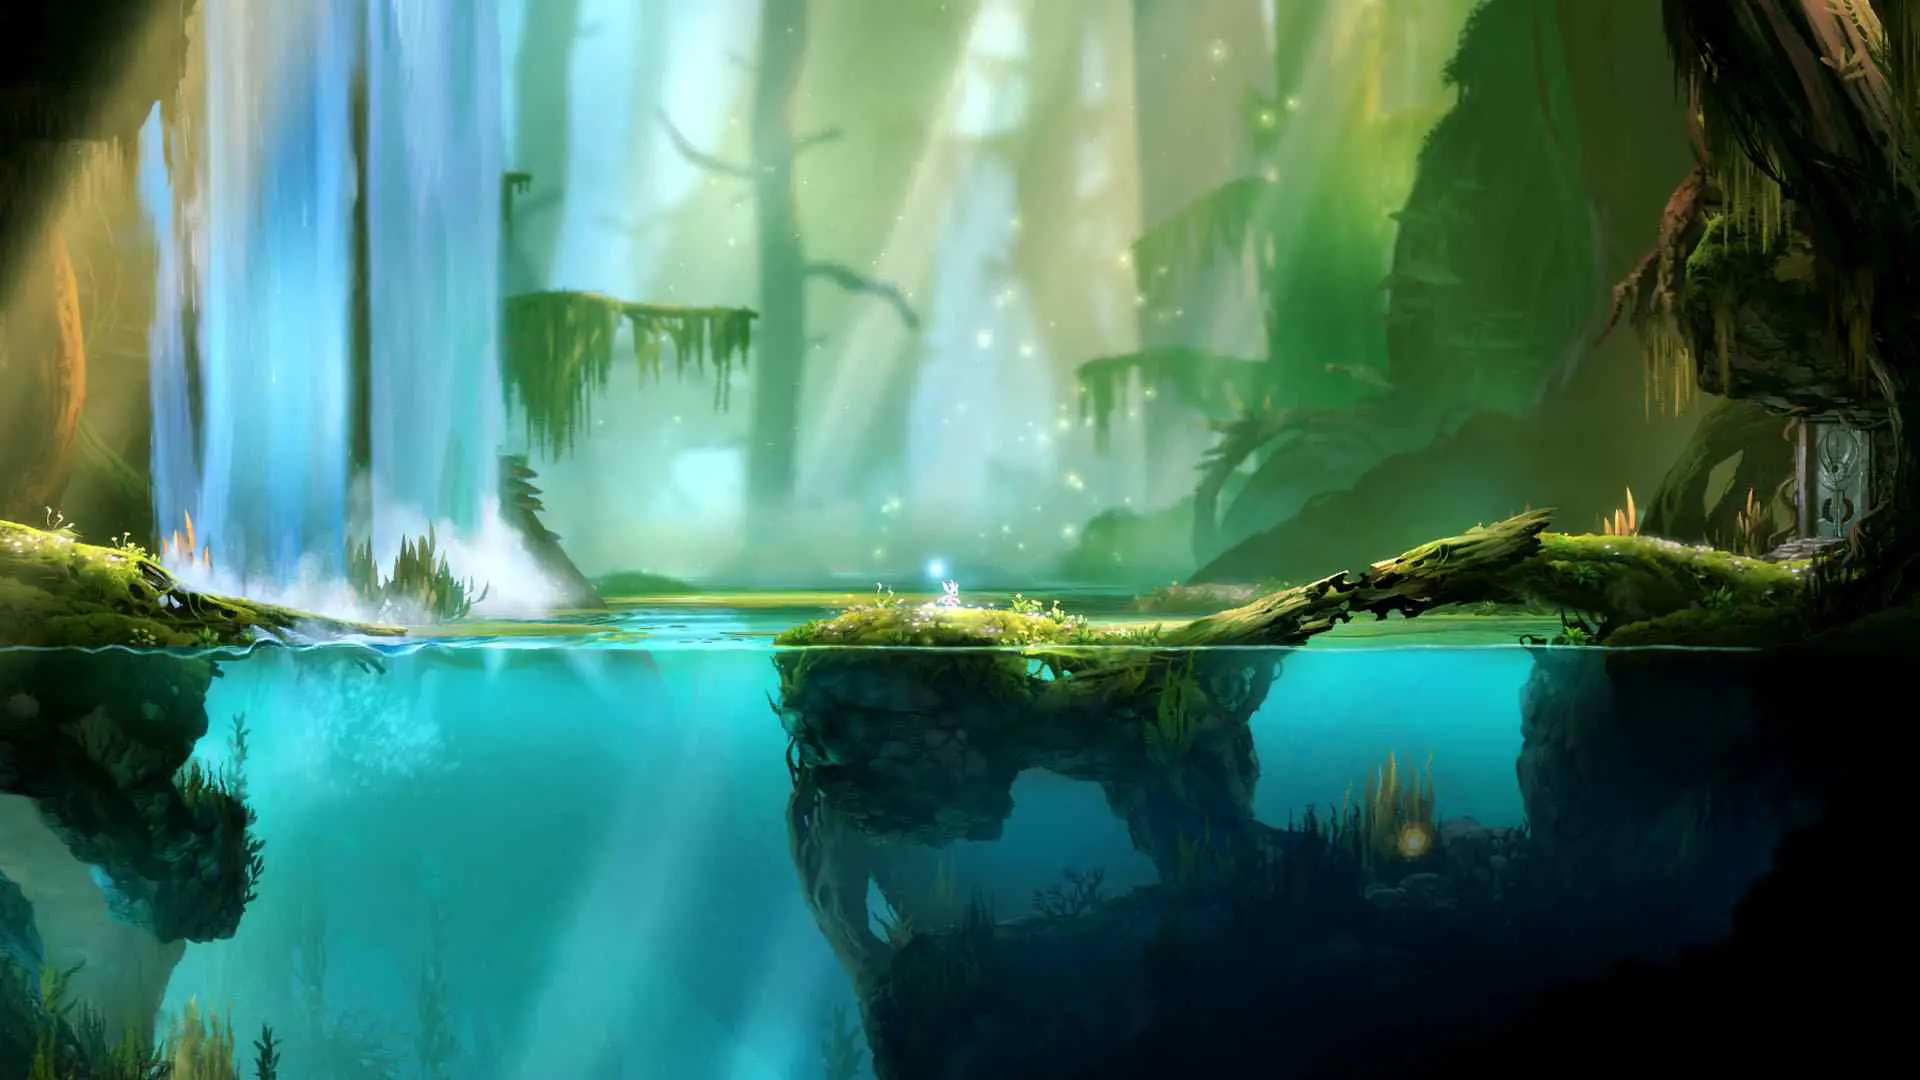 Developed by Moon Studios, Ori and the Blind Forest is a critically acclaimed platformer game in a beautifully hand-drawn forest filled with mystical creatures and ancient ruins.